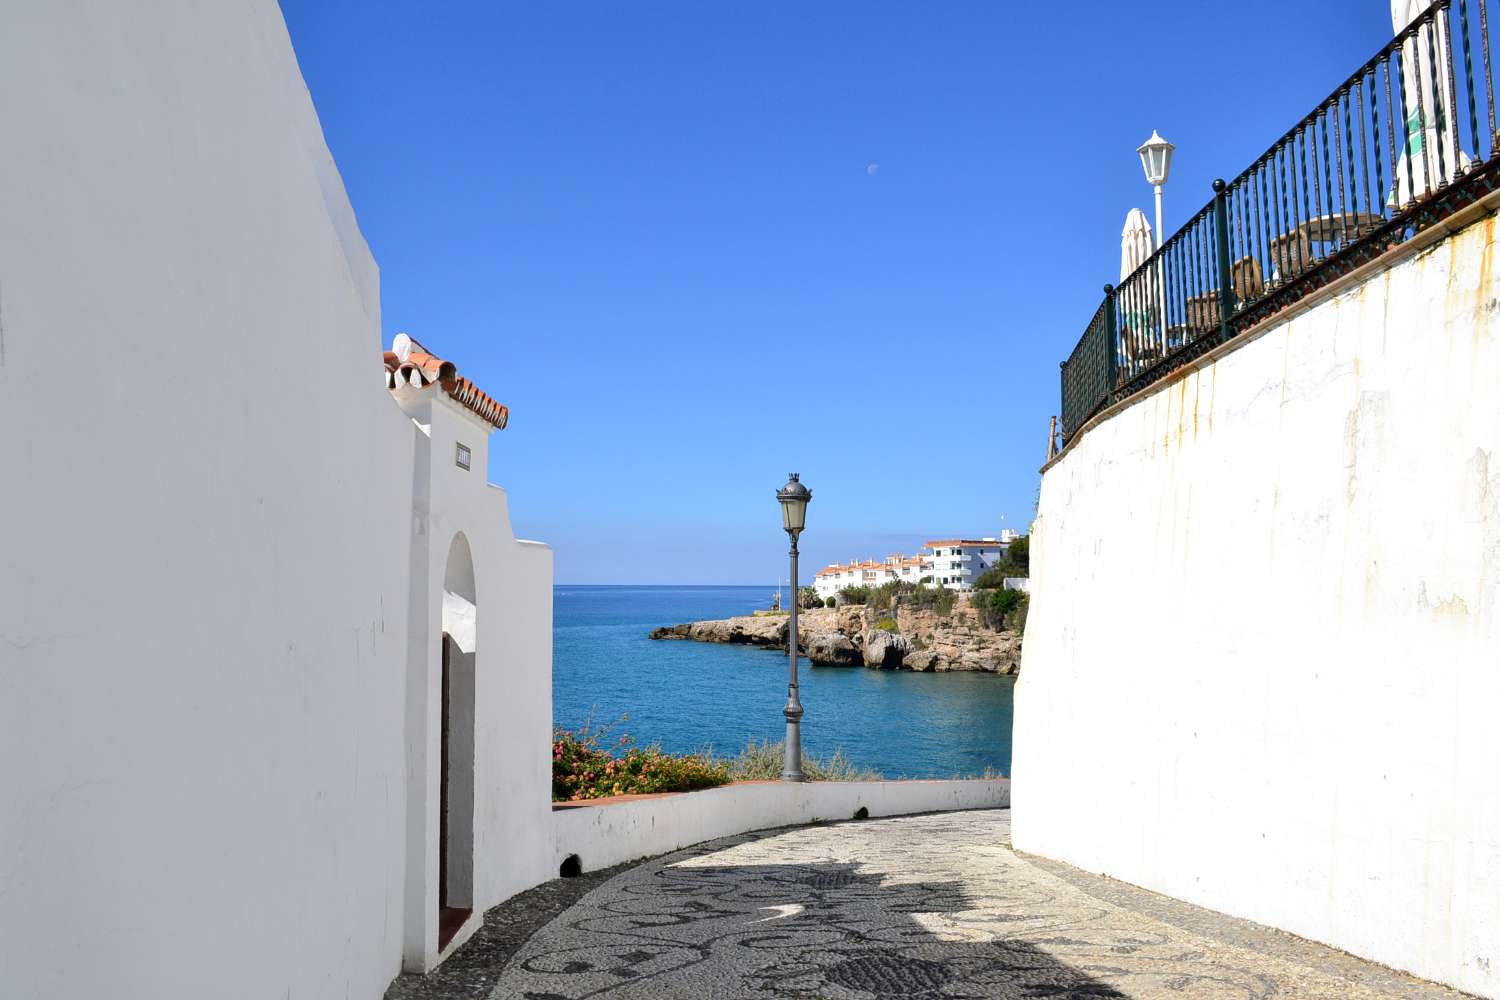 Apartment for sale in Nerja located in Verde Mar, one of the most desired apartment complexes in the center of Nerja